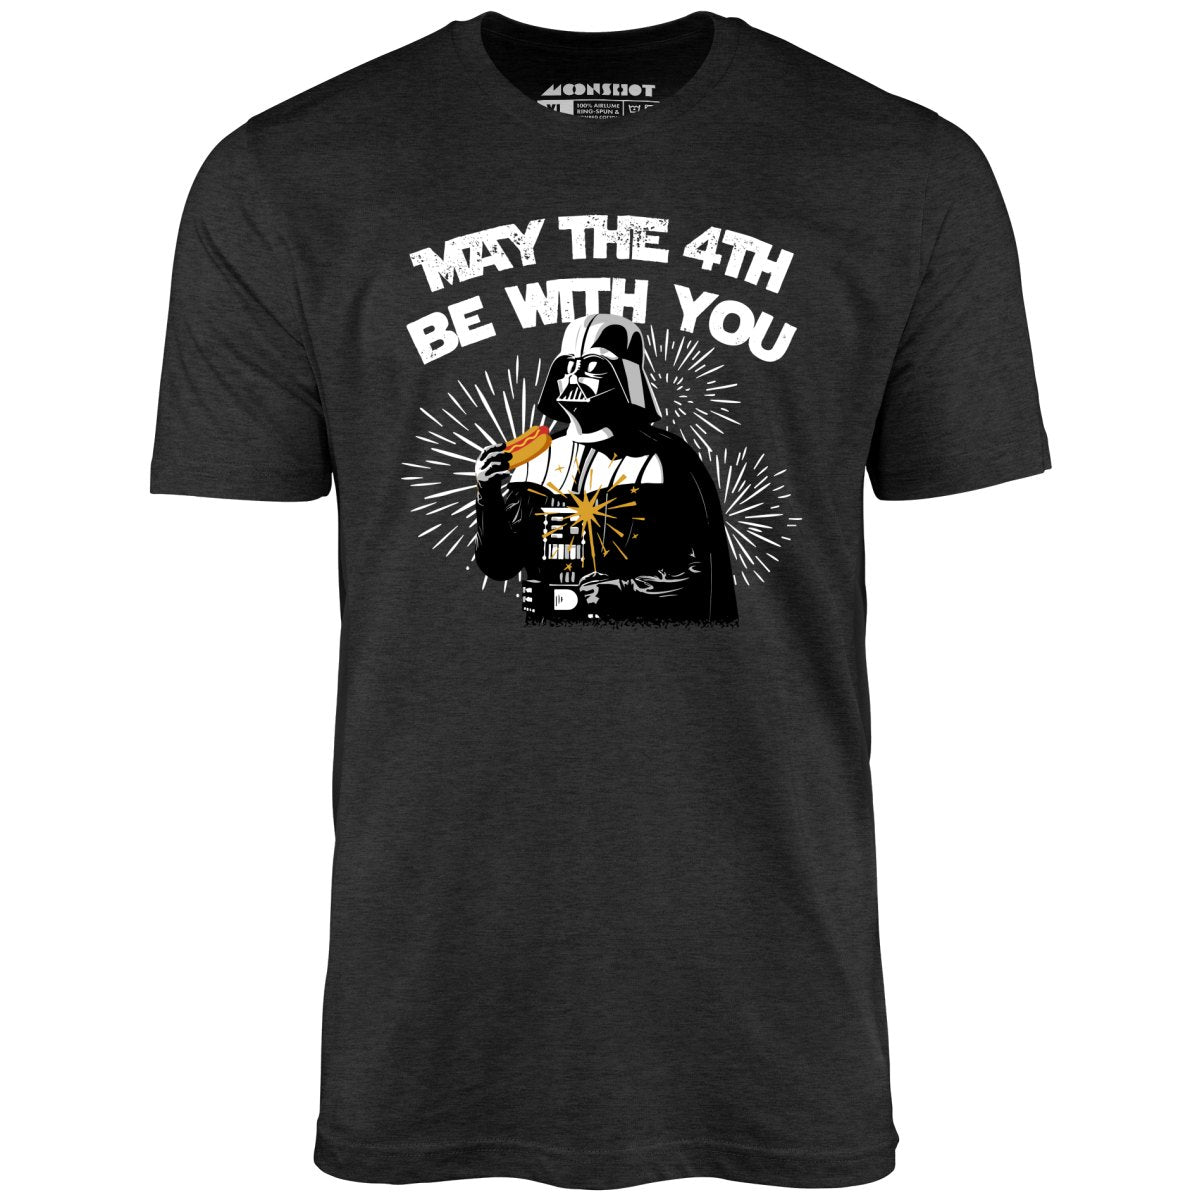 May The 4th Be With You - Unisex T-Shirt